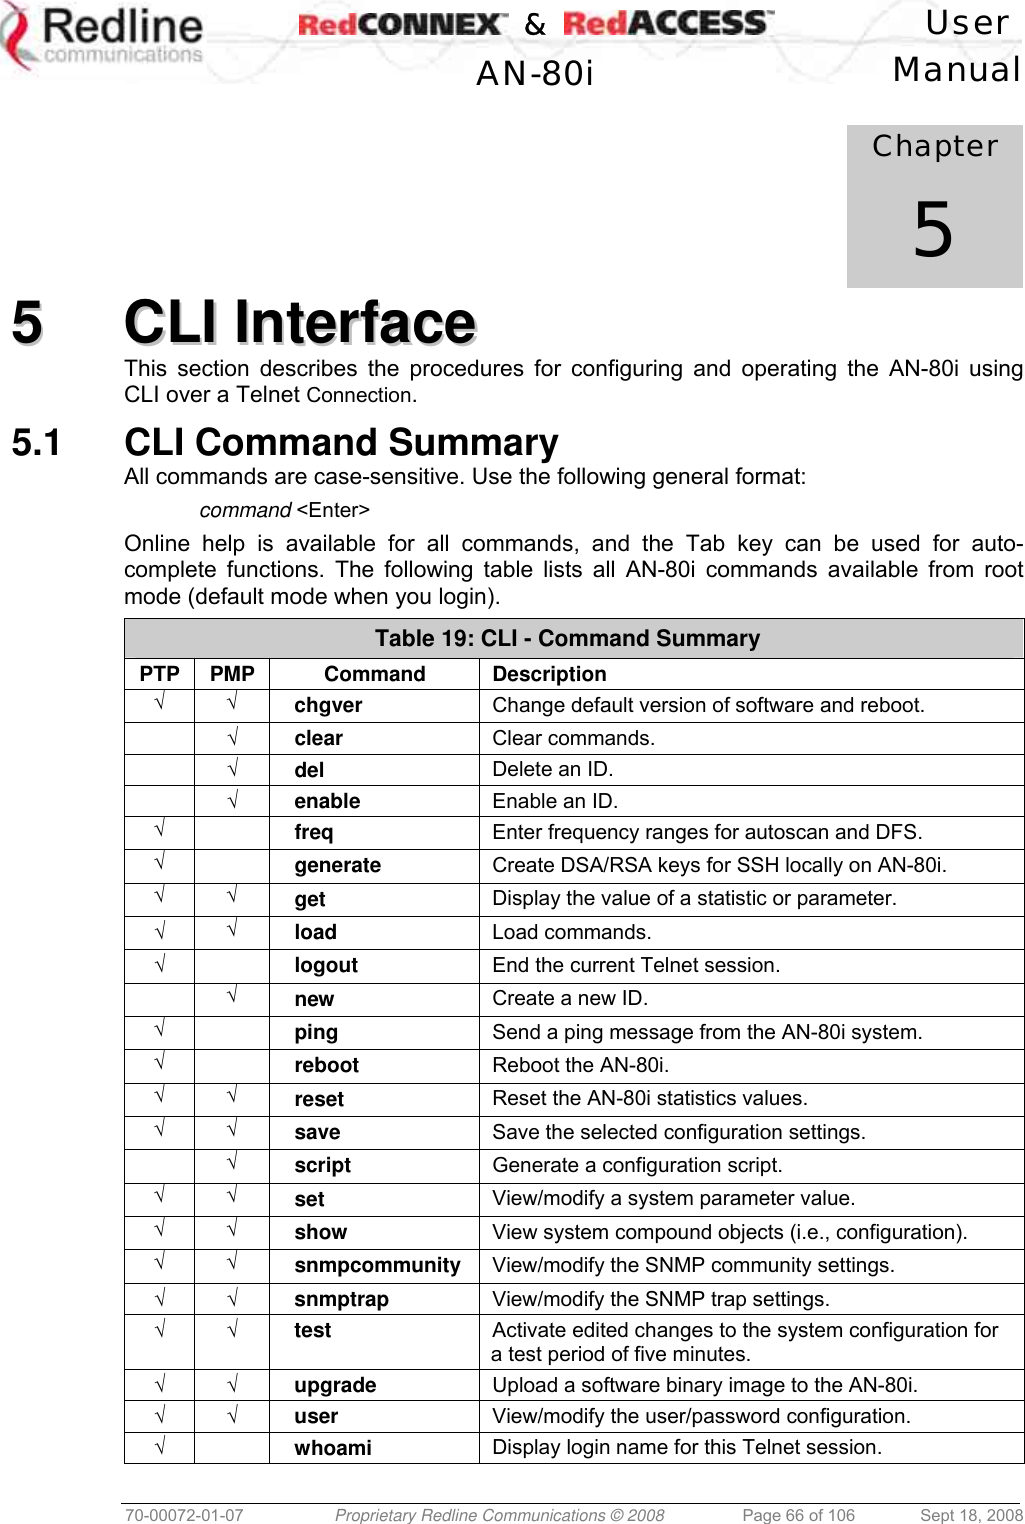    &amp;  User  AN-80i Manual  70-00072-01-07  Proprietary Redline Communications © 2008  Page 66 of 106  Sept 18, 2008             Chapter 5 55  CCLLII  IInntteerrffaaccee  This section describes the procedures for configuring and operating the AN-80i using CLI over a Telnet Connection. 5.1  CLI Command Summary All commands are case-sensitive. Use the following general format:  command &lt;Enter&gt; Online help is available for all commands, and the Tab key can be used for auto-complete functions. The following table lists all AN-80i commands available from root mode (default mode when you login). Table 19: CLI - Command Summary PTP PMP  Command  Description √ √ chgver  Change default version of software and reboot.  √ clear  Clear commands.  √ del  Delete an ID.  √ enable  Enable an ID. √  freq  Enter frequency ranges for autoscan and DFS. √  generate  Create DSA/RSA keys for SSH locally on AN-80i. √ √ get  Display the value of a statistic or parameter.  √ √ load  Load commands. √  logout  End the current Telnet session.  √ new  Create a new ID. √  ping  Send a ping message from the AN-80i system. √  reboot  Reboot the AN-80i. √ √ reset  Reset the AN-80i statistics values. √ √ save  Save the selected configuration settings.  √ script  Generate a configuration script. √ √ set  View/modify a system parameter value. √ √ show  View system compound objects (i.e., configuration). √ √ snmpcommunity  View/modify the SNMP community settings. √ √ snmptrap  View/modify the SNMP trap settings. √ √ test  Activate edited changes to the system configuration for a test period of five minutes. √ √ upgrade  Upload a software binary image to the AN-80i. √ √ user  View/modify the user/password configuration. √  whoami  Display login name for this Telnet session.  